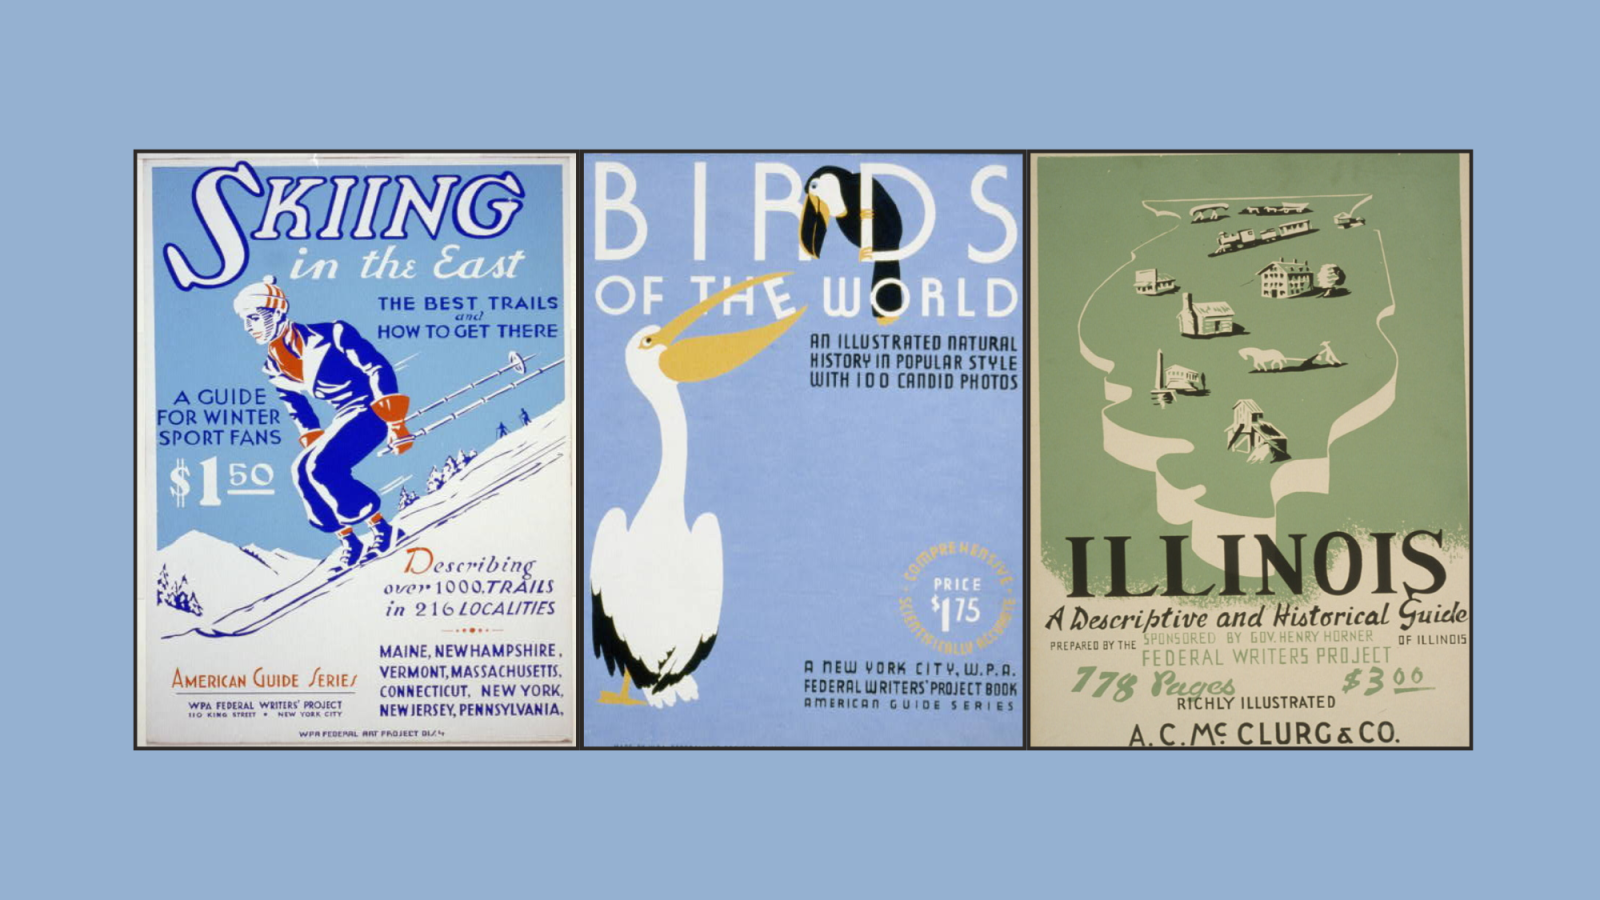 Federal Writers&#039; Project magazine covers (from left to right): &quot;Skiing in the East: The Best Trails and How to Get There&quot; with graphic of a skier going down a snowy slope; &quot;Birds of the World: An Illustrated Natural History In Popular Styles with 100 Candid Photos&quot; with graphic of a pelican eating the &quot;E&quot; in &quot;The&quot;; &quot;Illinois: A Descriptive and Historical Guide&quot; with graphic of a map of Illinois illustrating homes, horses pulling plows, and train.